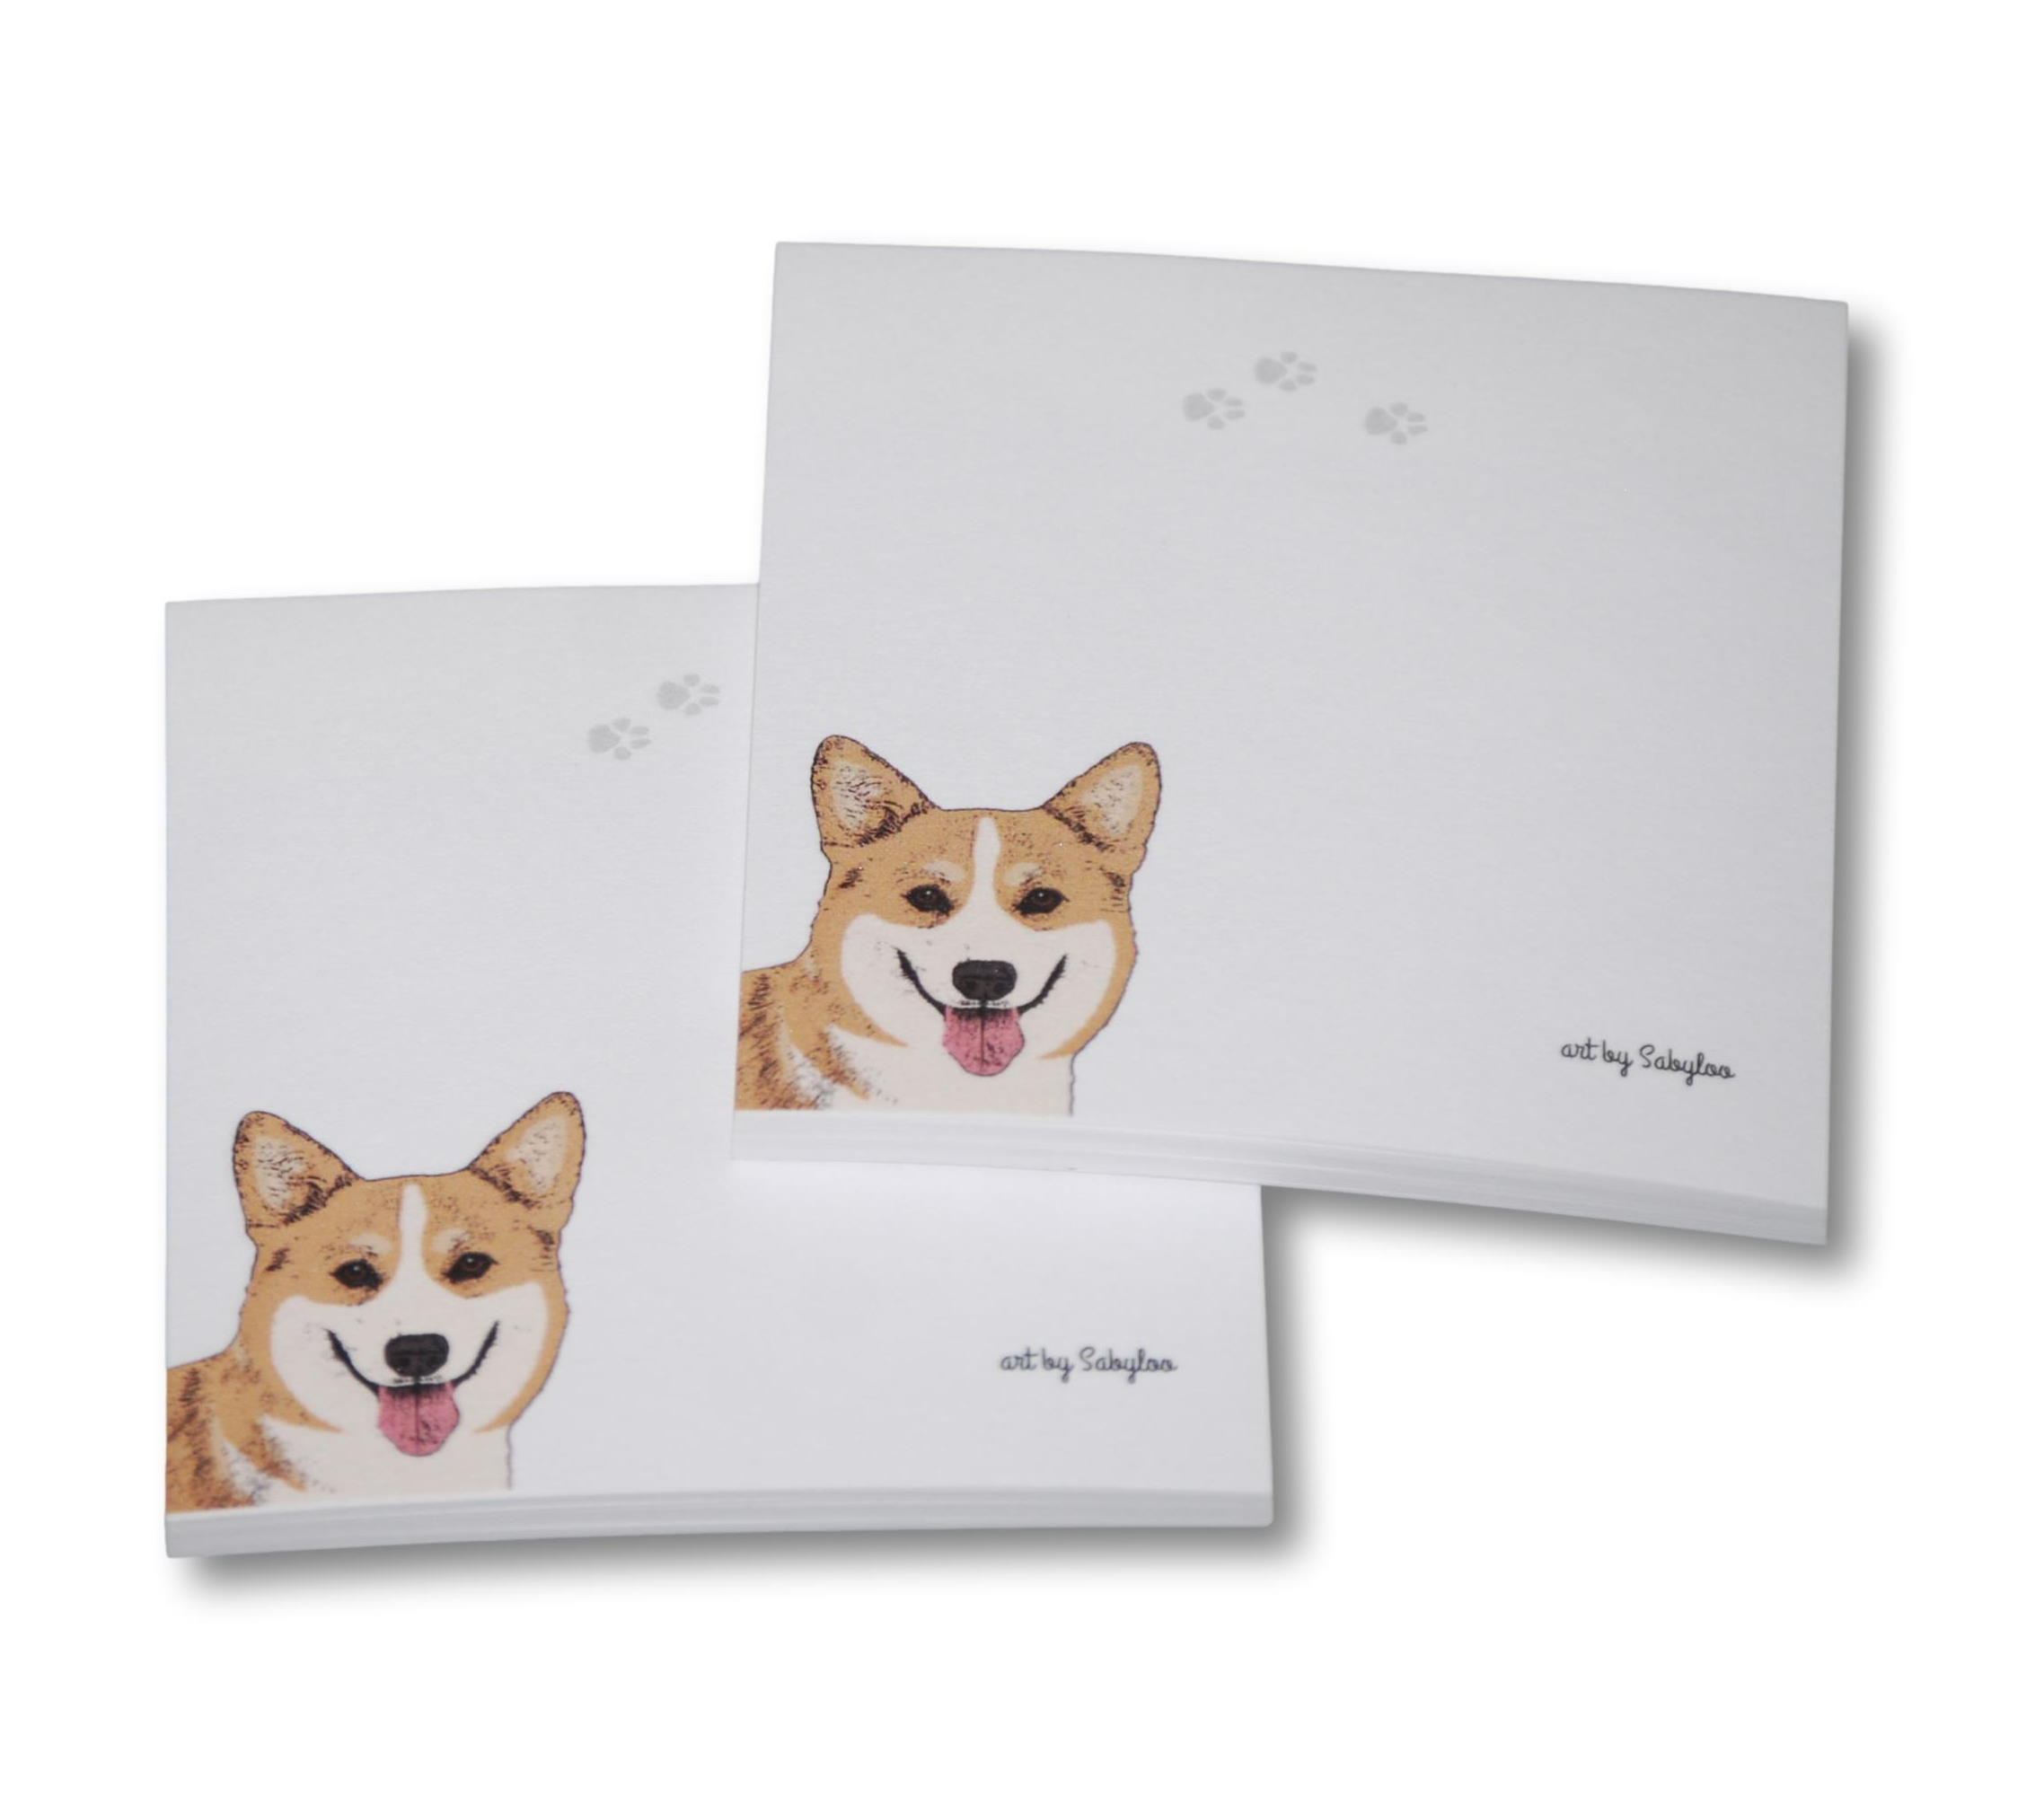 NEW Lot of 2 CORGI Notepads Magnetic CHRISTMAS 100 pages each 